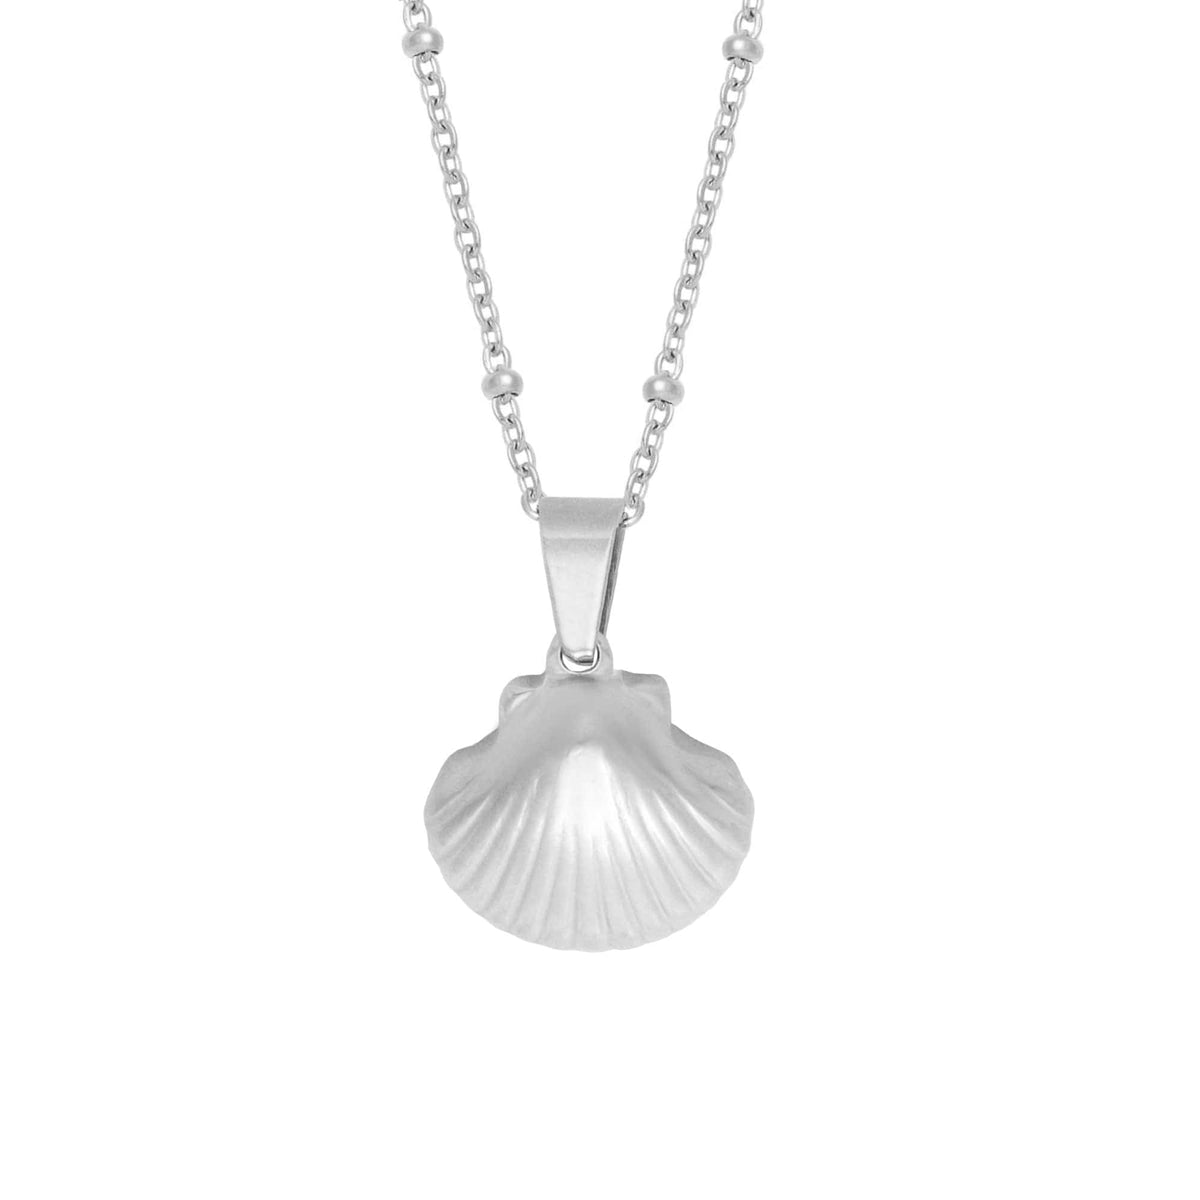 BohoMoon Stainless Steel Seychelles Necklace Silver